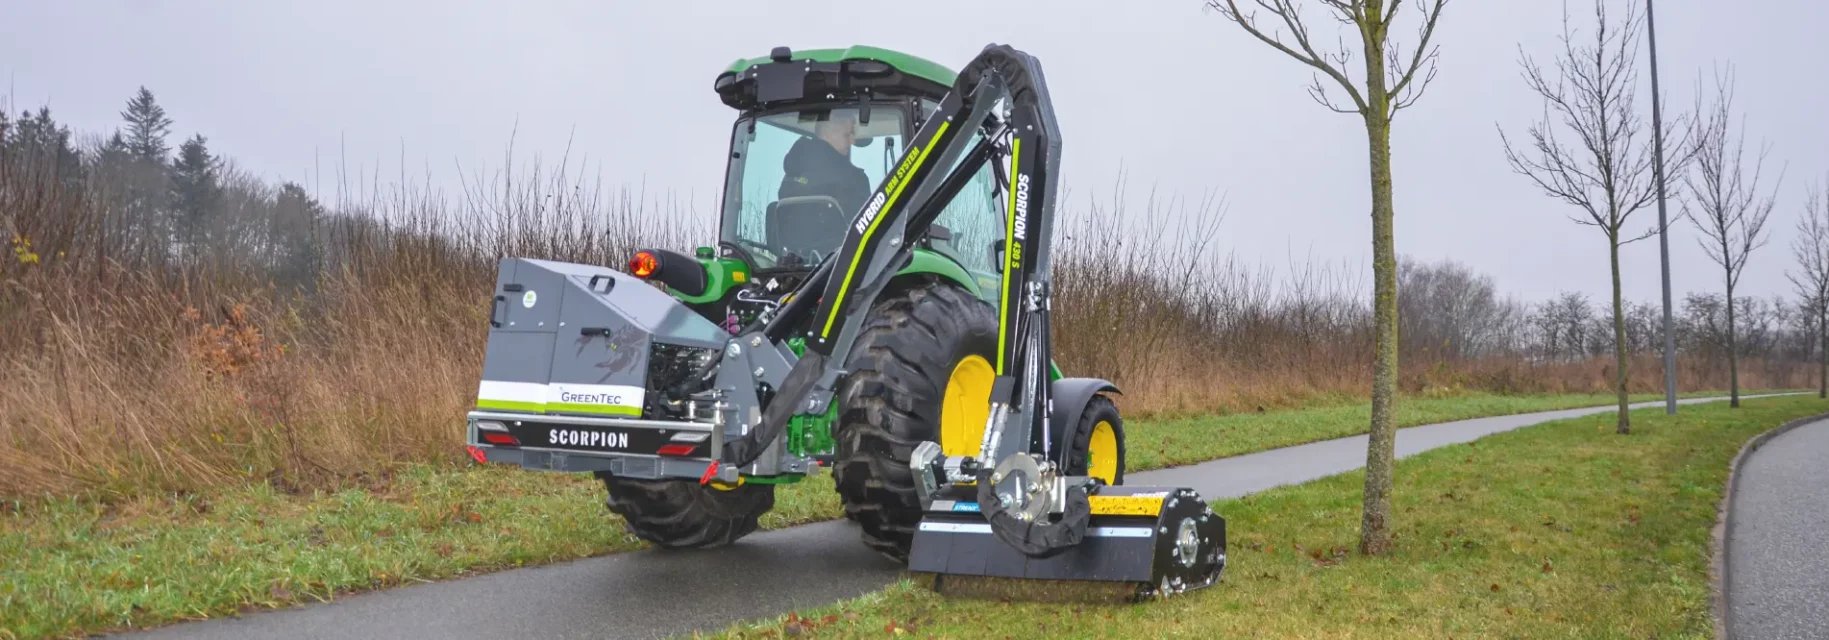 Small tractor with boom mower drives on bike path and mows grass in verges